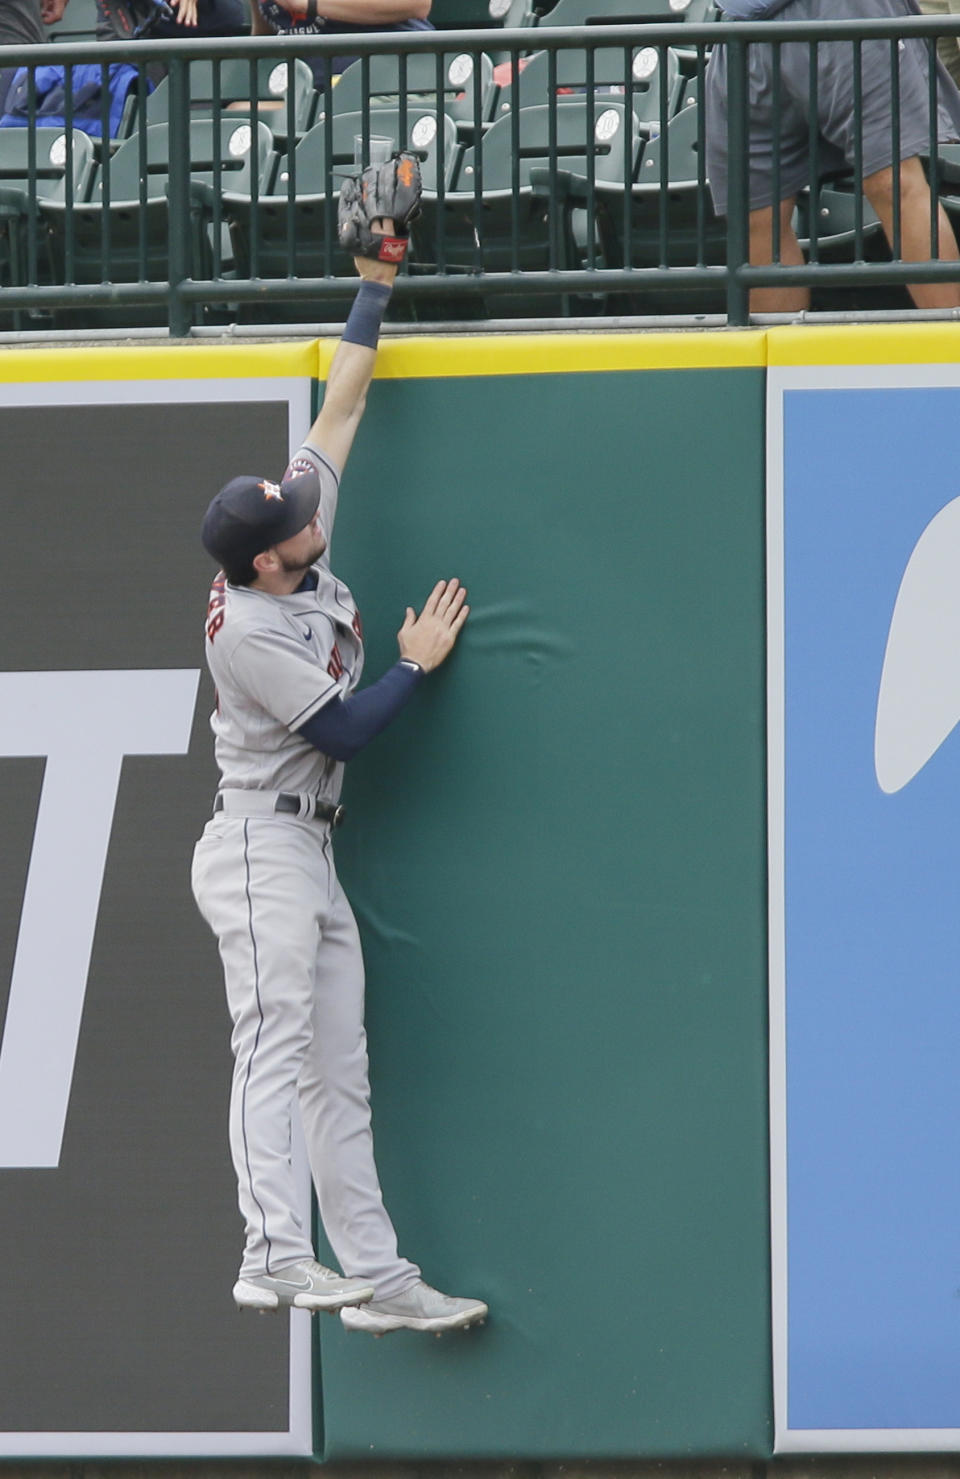 Houston Astros' Kyle Tucker goes up against the right field wall trying to catch a two-run home run hit by Detroit Tigers' Zack Short during the fifth inning of the first baseball game of a doubleheader Saturday, June 26, 2021, in Detroit. The Tigers defeated the Astros 3-1. (AP Photo/Duane Burleson)